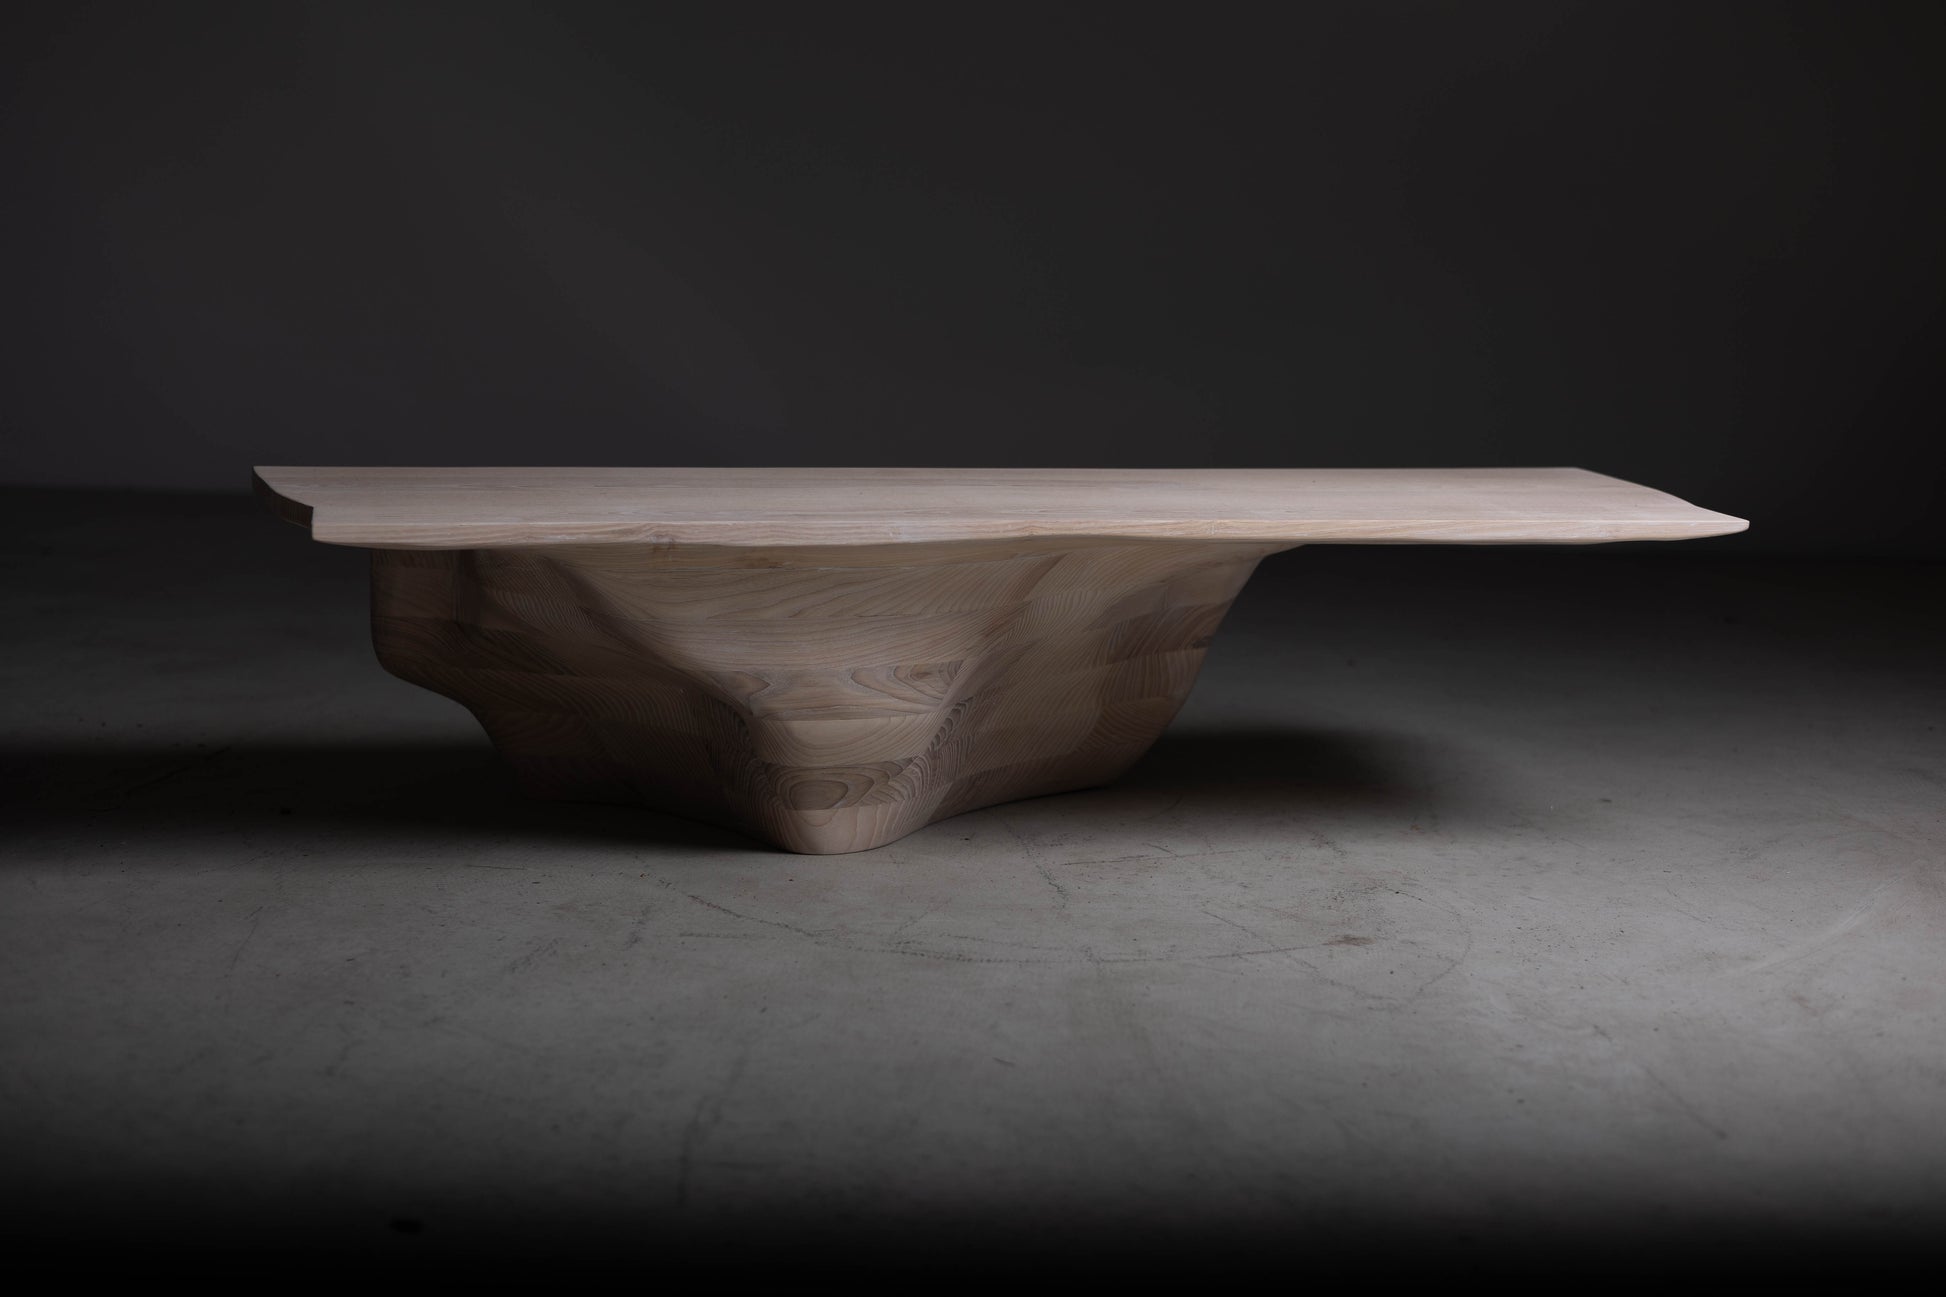 Sculptural Solid Wood Coffee Table EM111 Part Of Erosio Collection | Main image sideview showing the whole table.